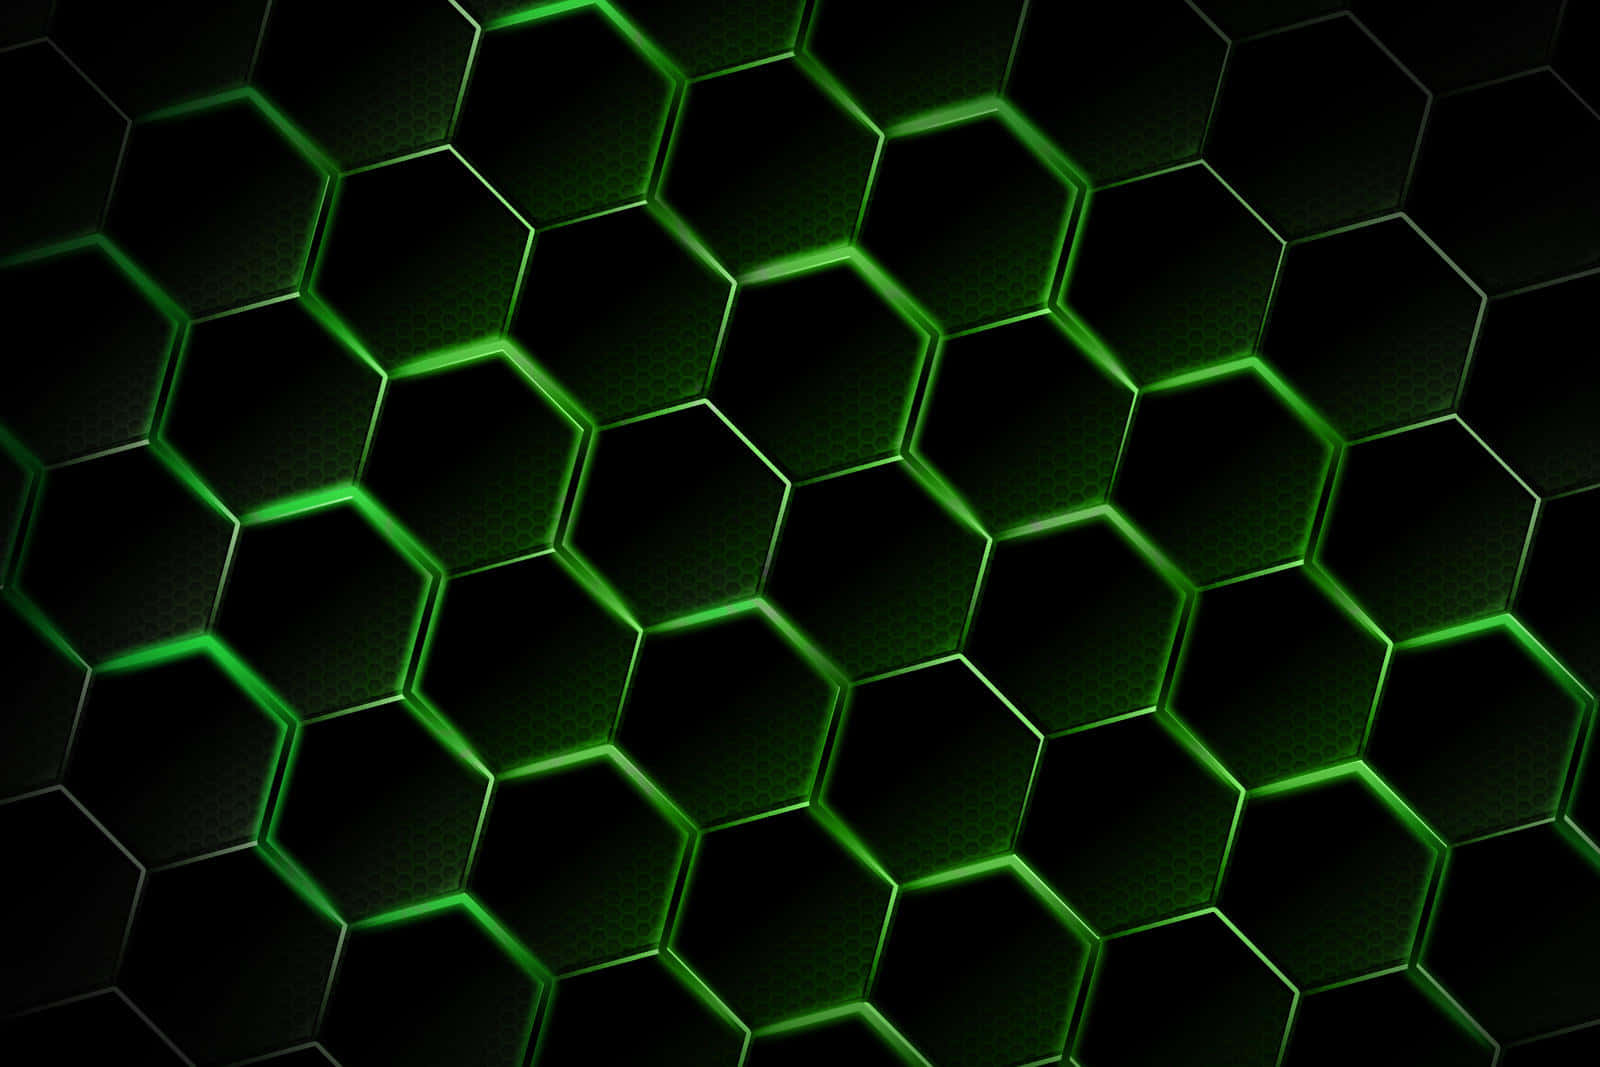 A honeycomb pattern, full of unique hexagonal sections